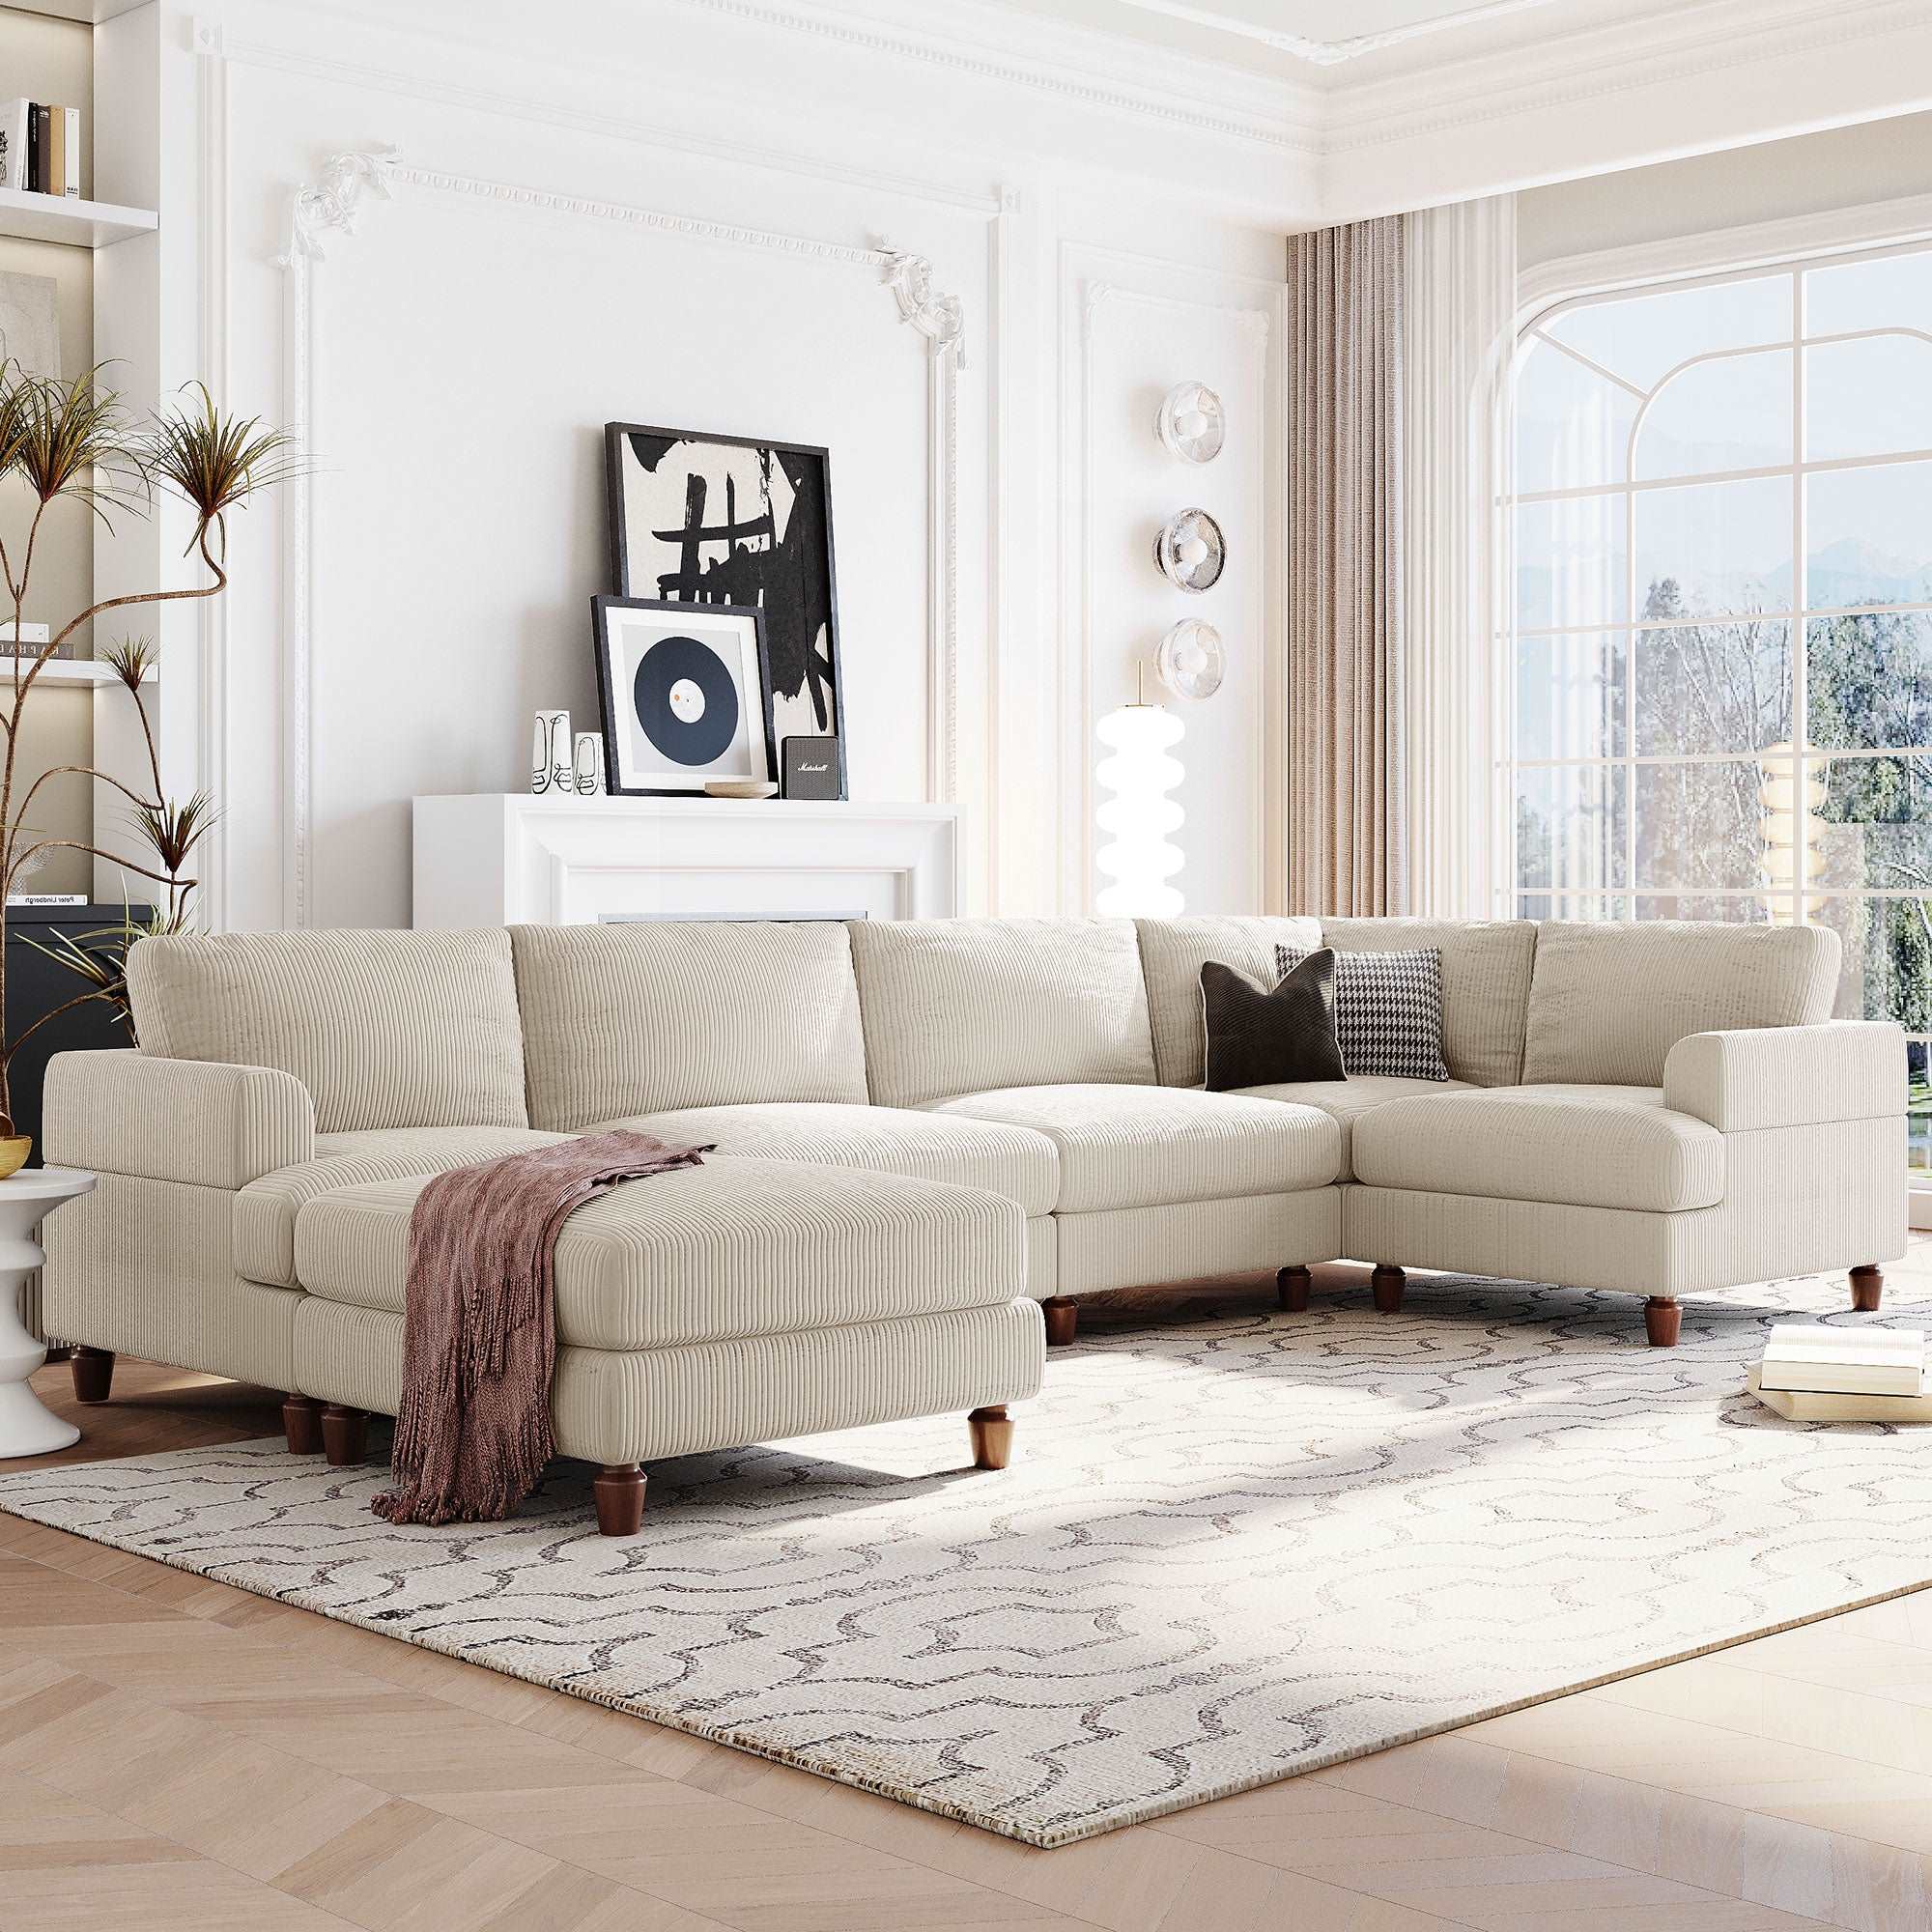 Bellemave 98" Modular Sectional Sofa with Ottoman L Shaped Corner Sectional